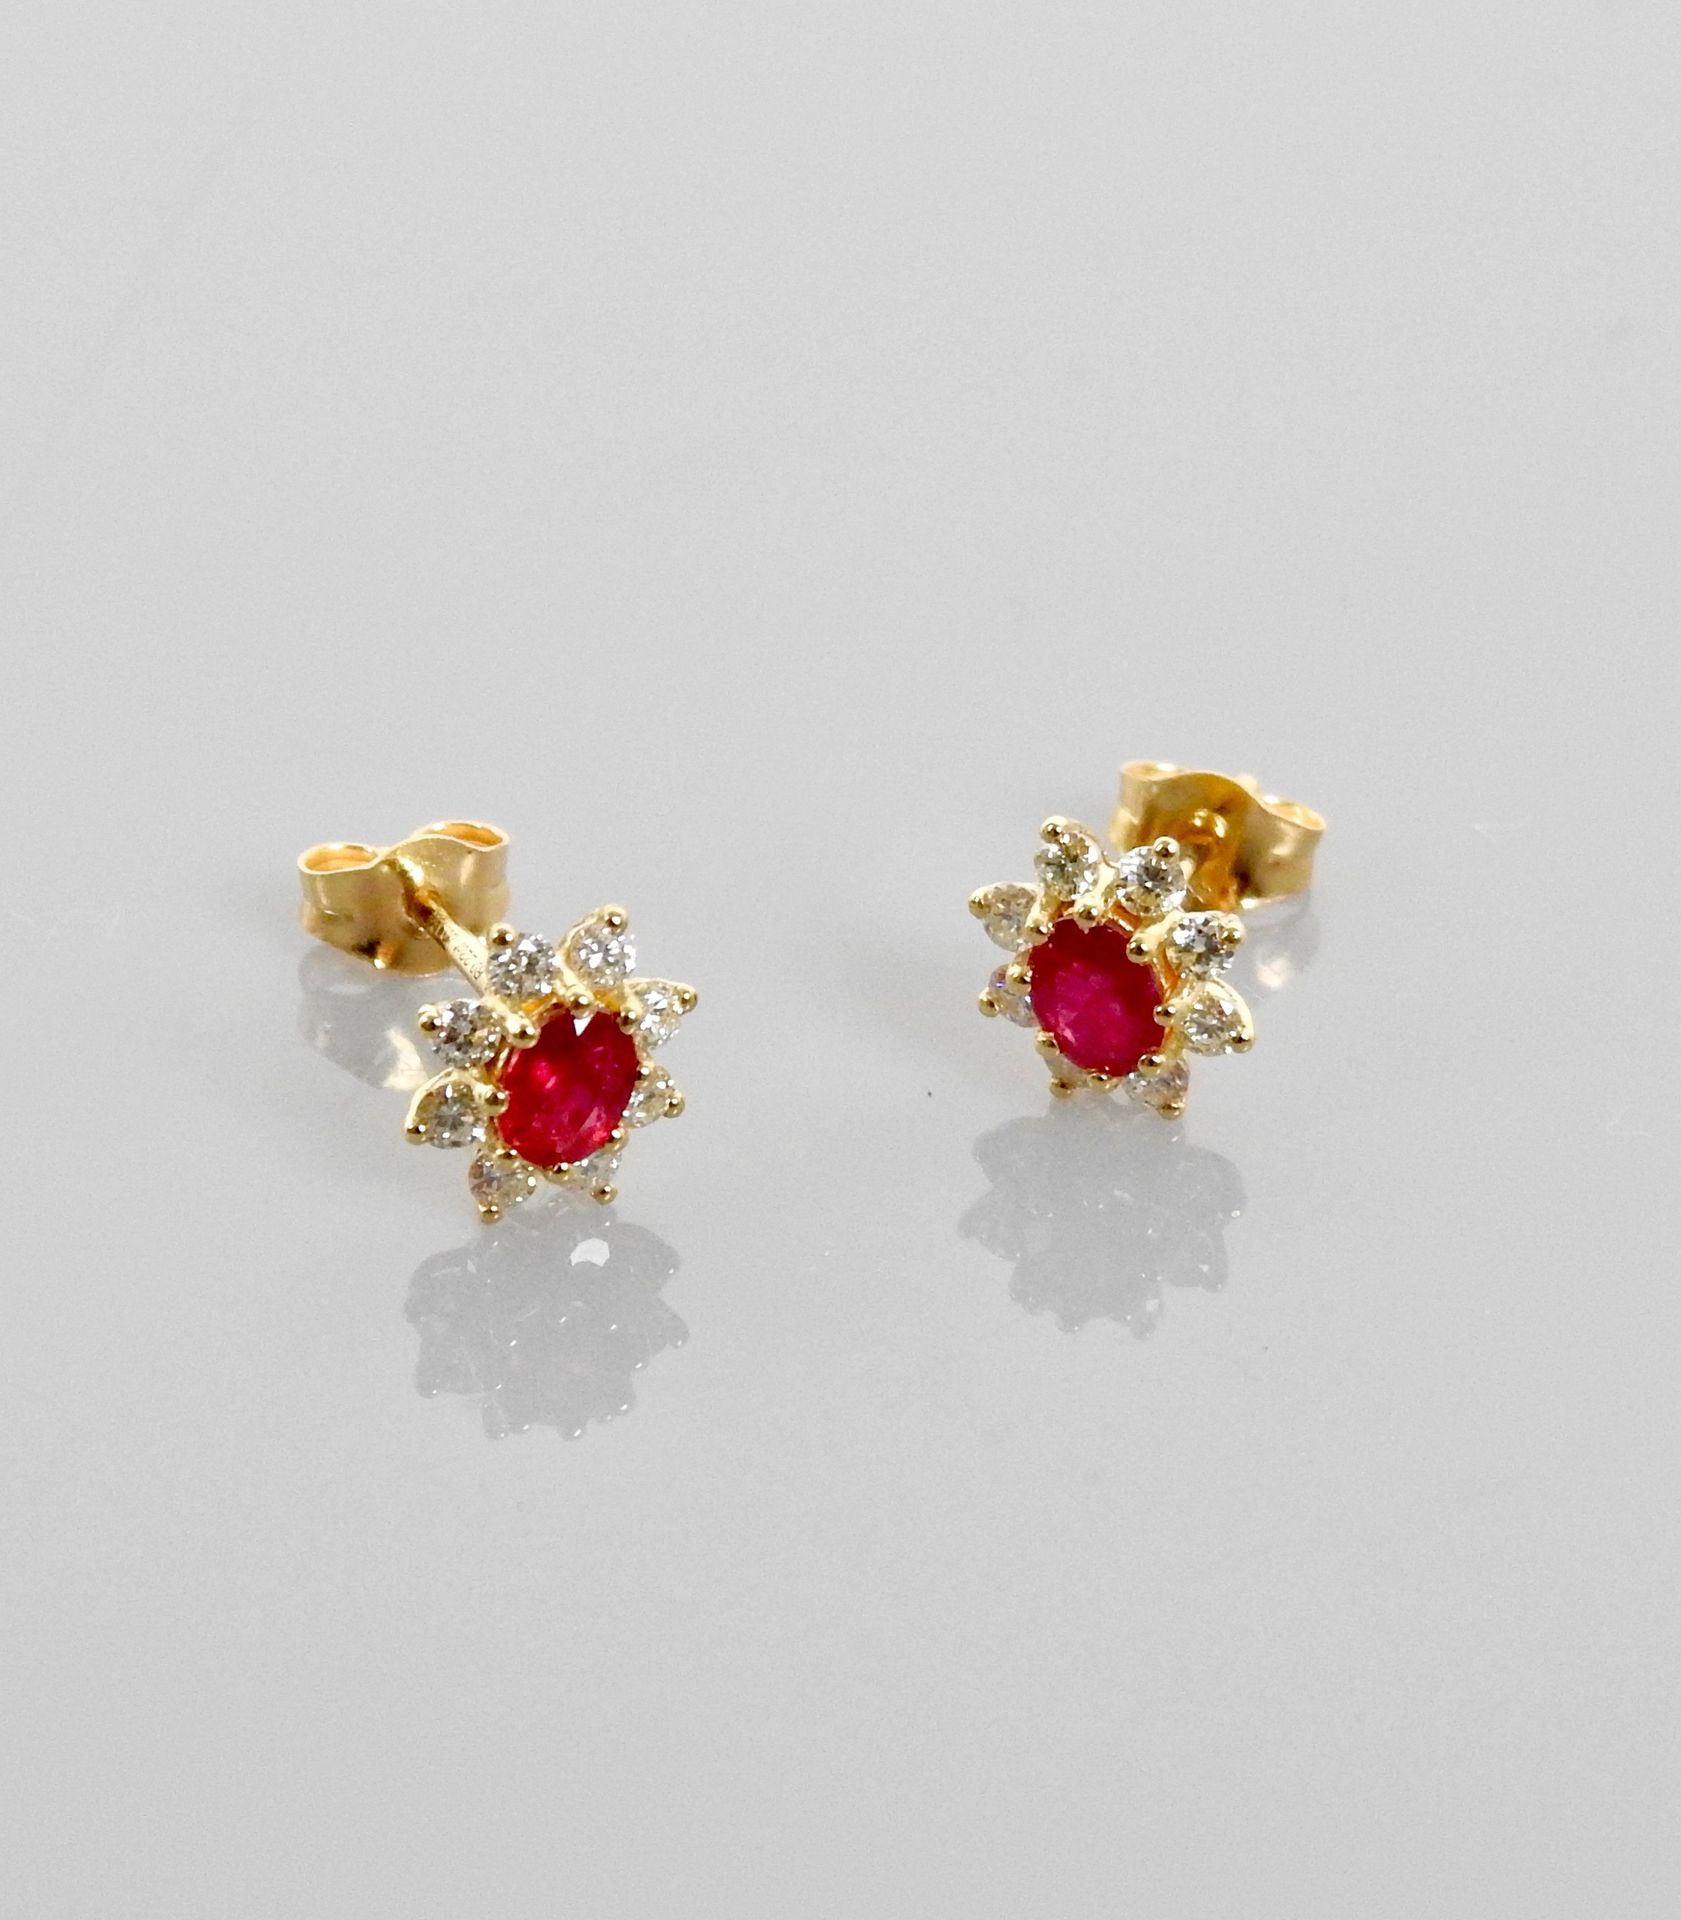 Null Earrings drawing a yellow gold floret, 750 MM, each centered with a ruby su&hellip;